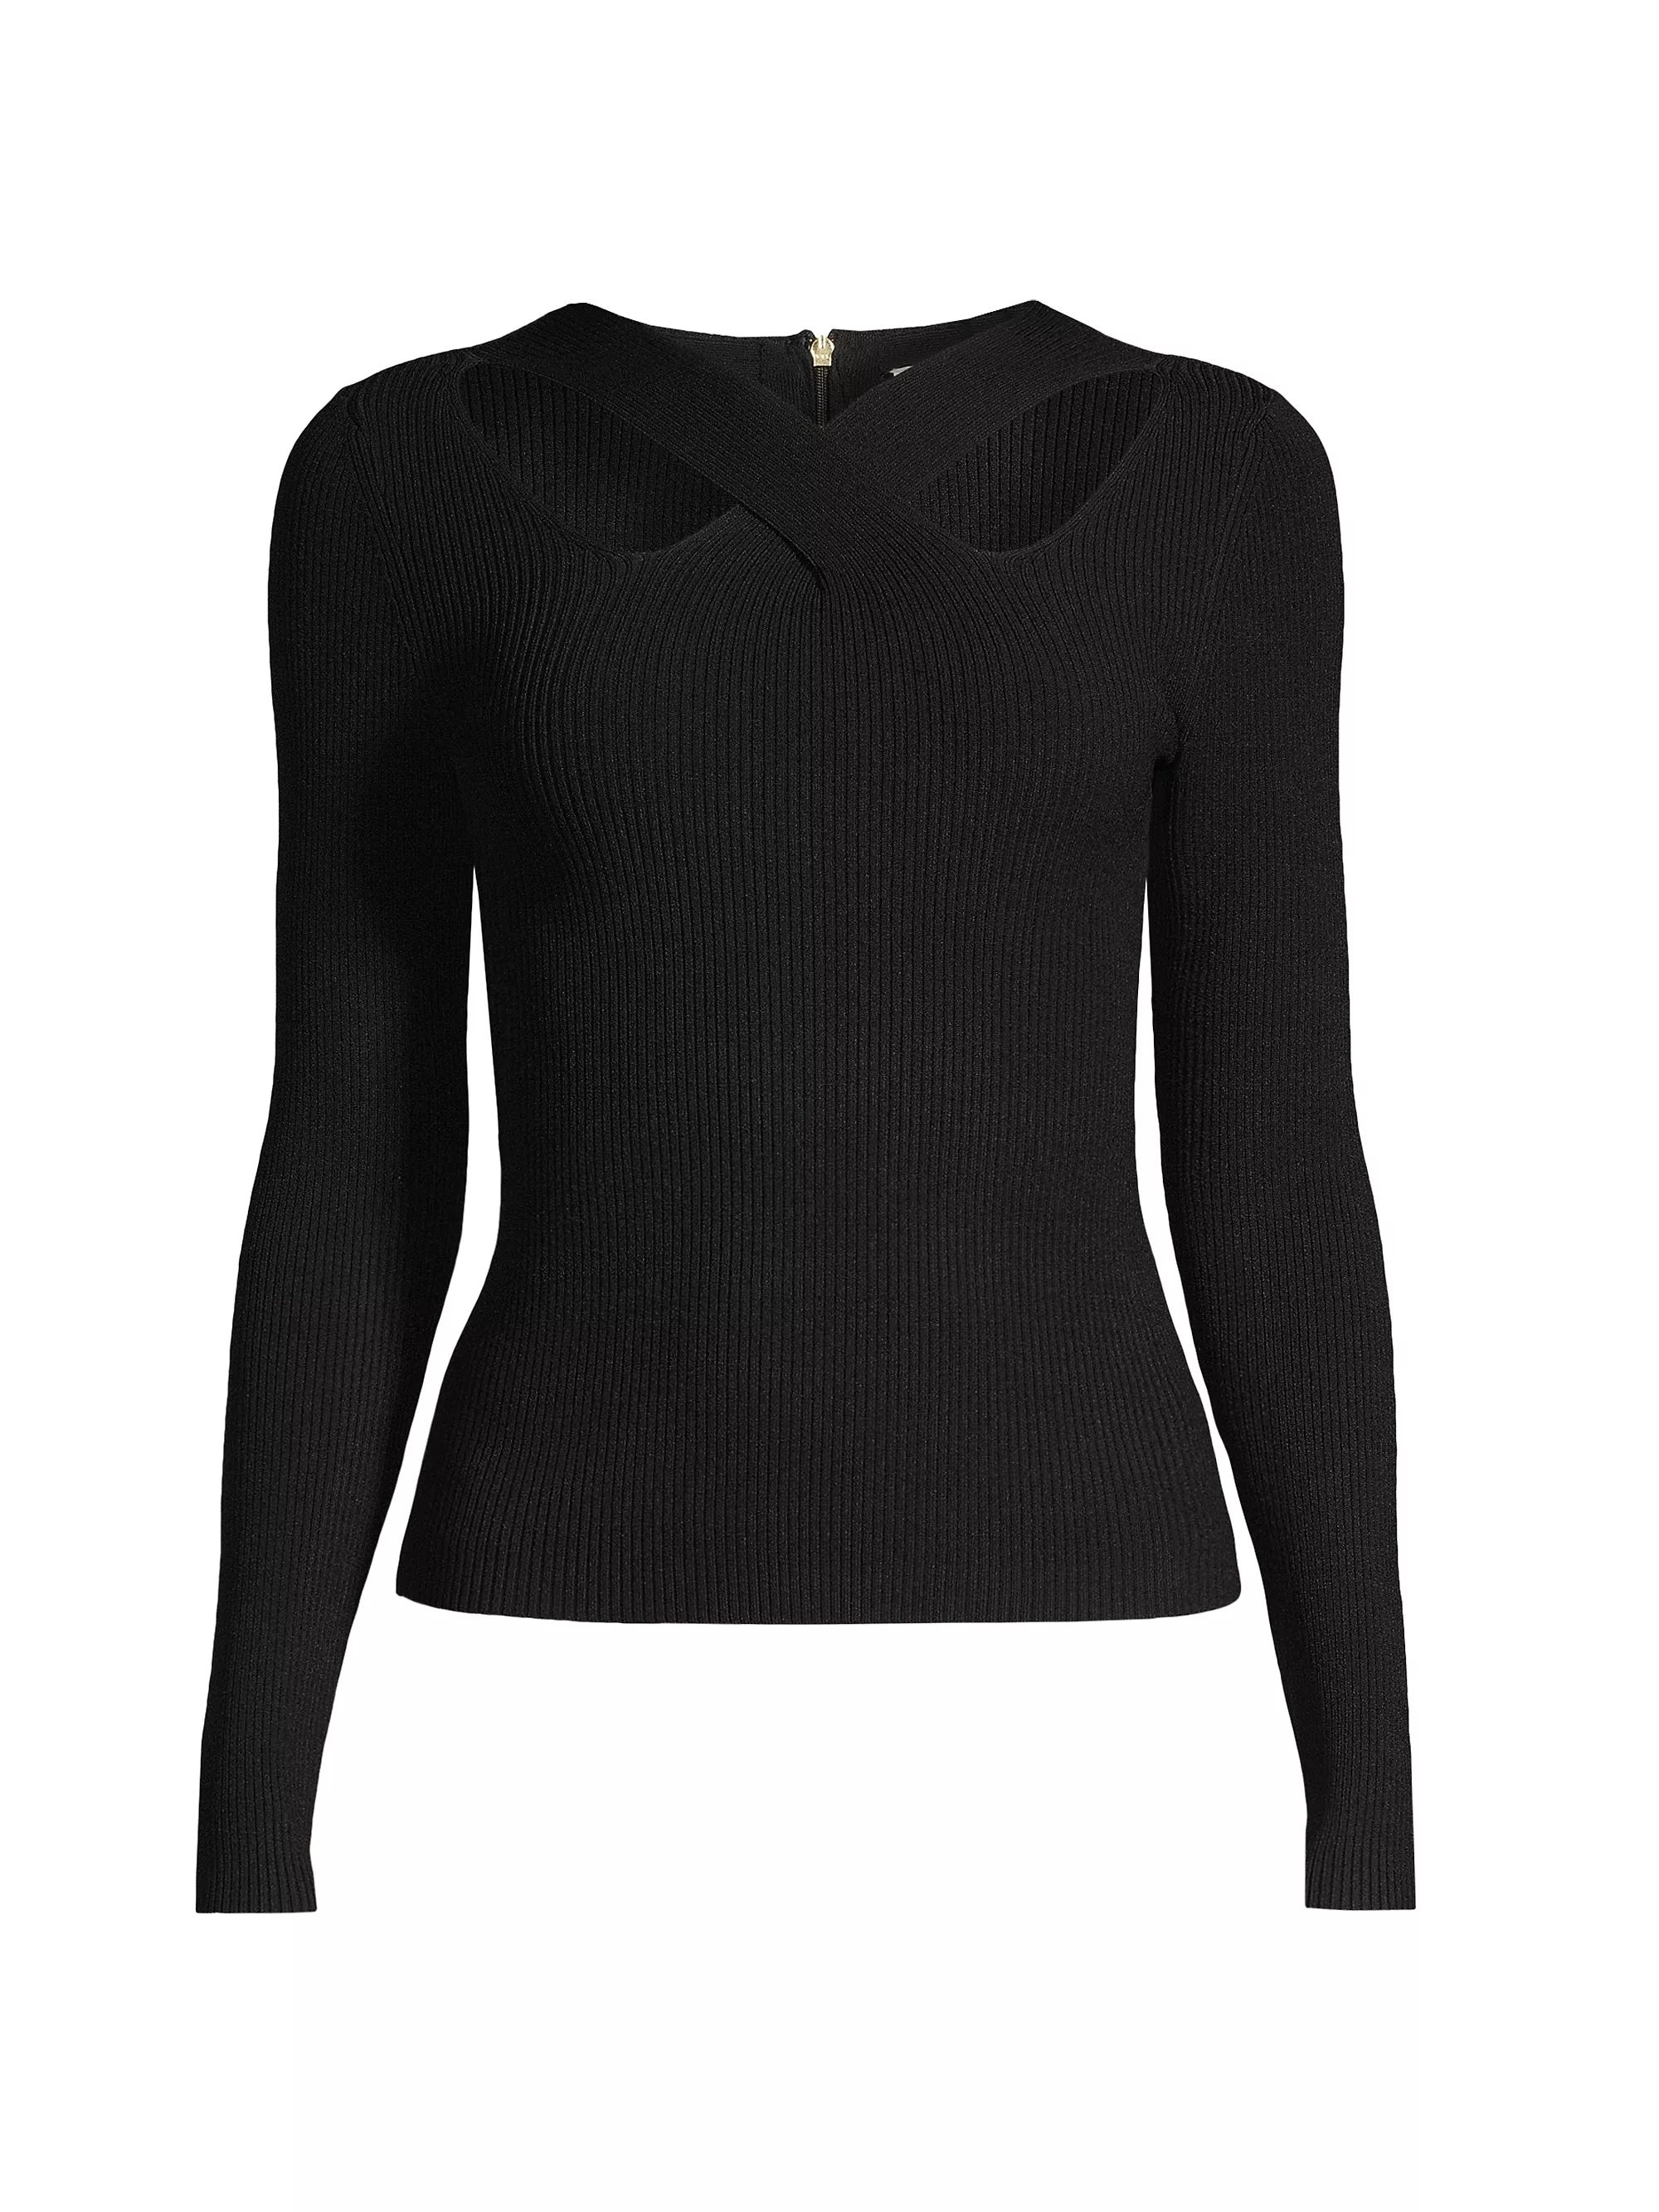 Cut-Out Rib-Knit Sweater | Saks Fifth Avenue